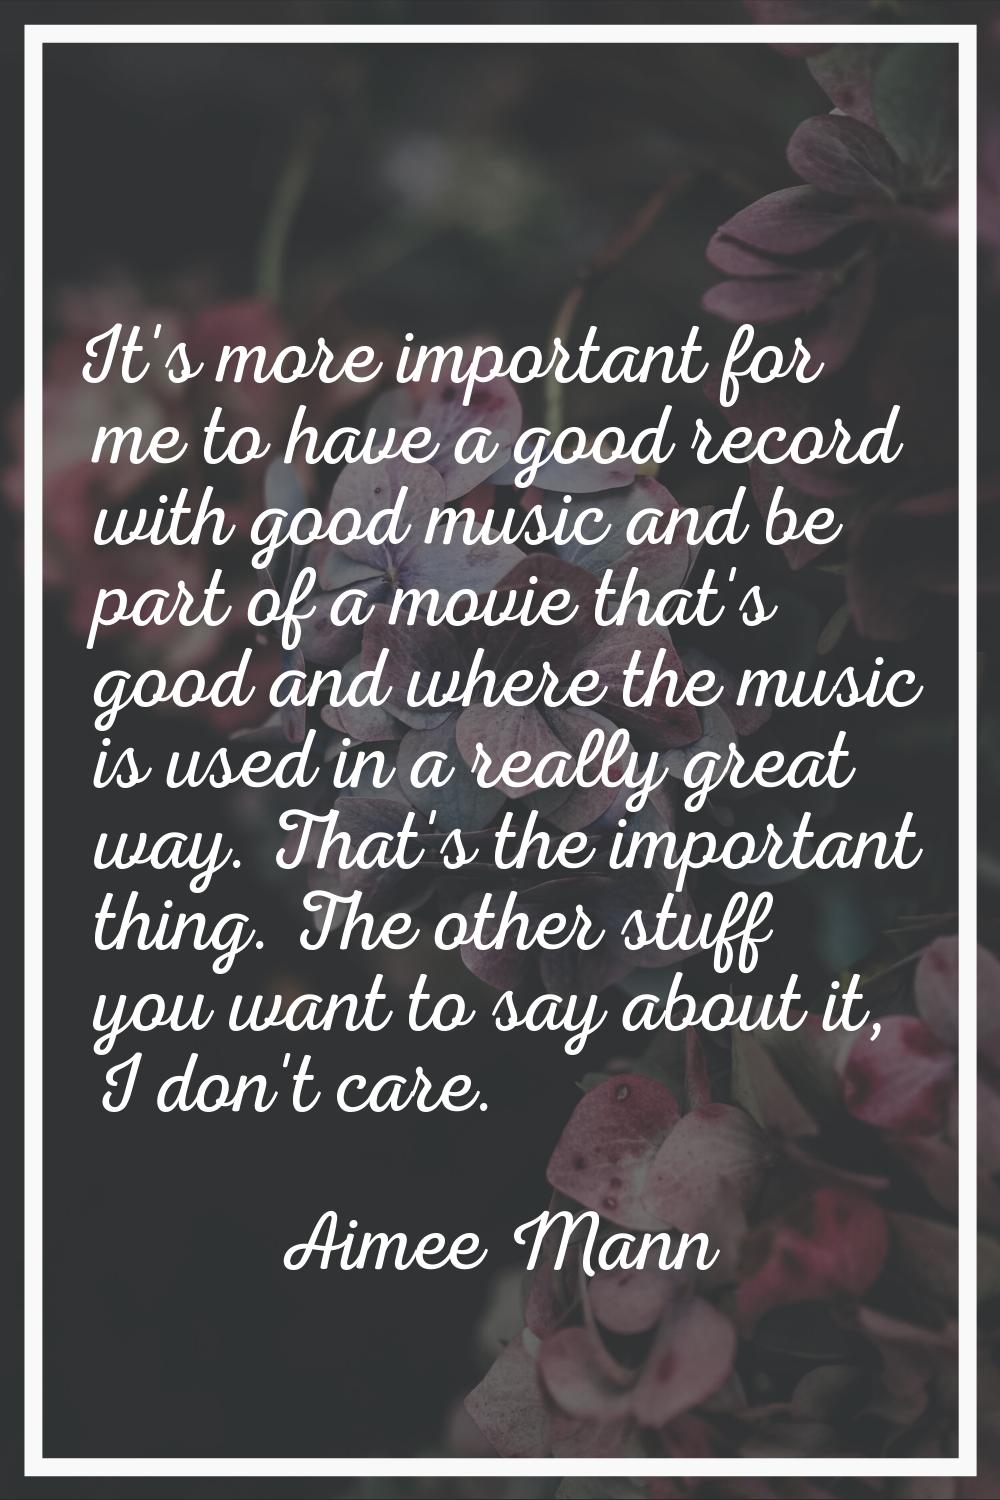 It's more important for me to have a good record with good music and be part of a movie that's good